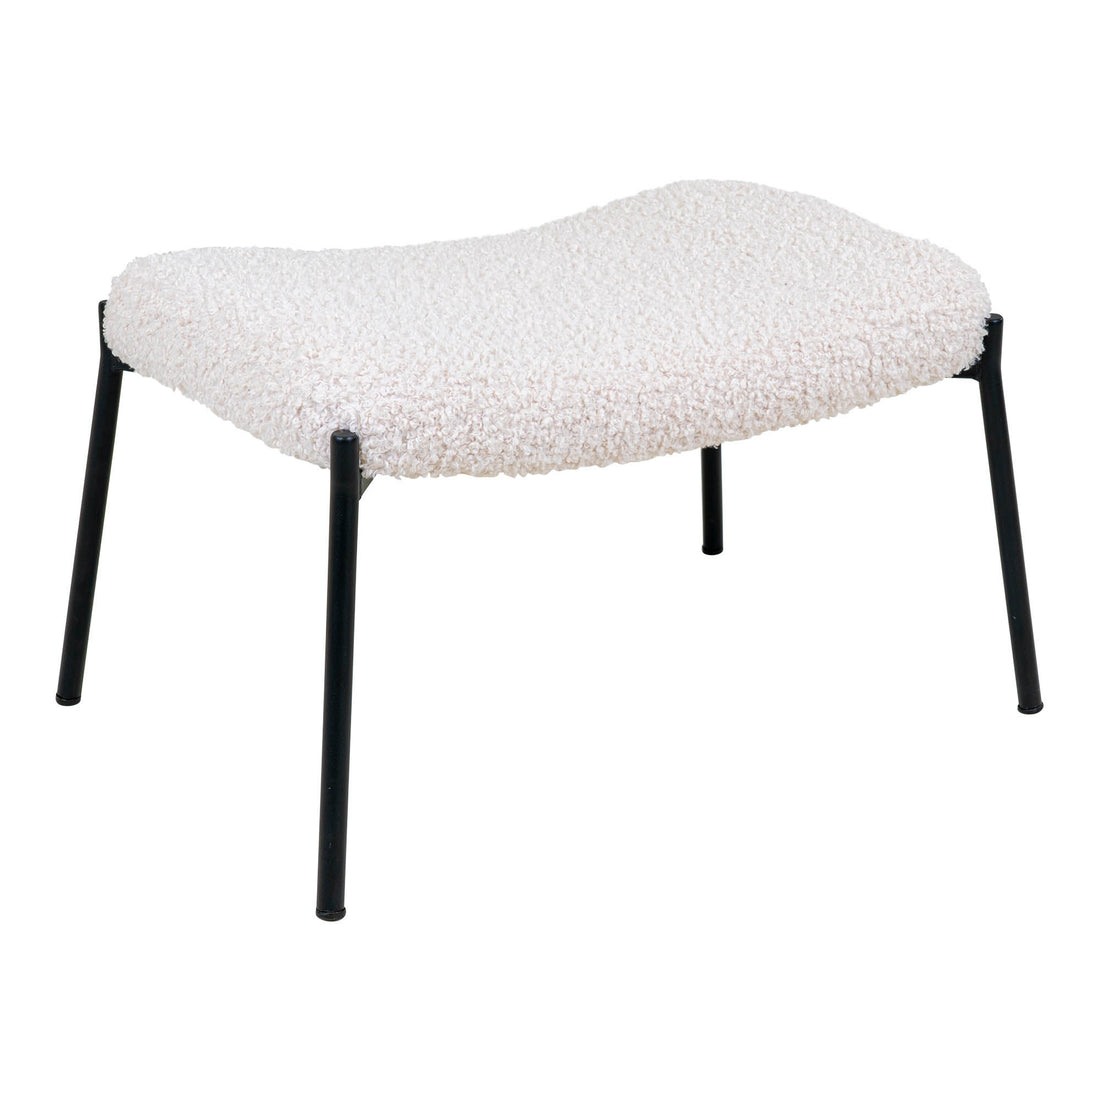 Glasgow footstool - footstool in white artificial lambskin with black legs - 1 - pcs